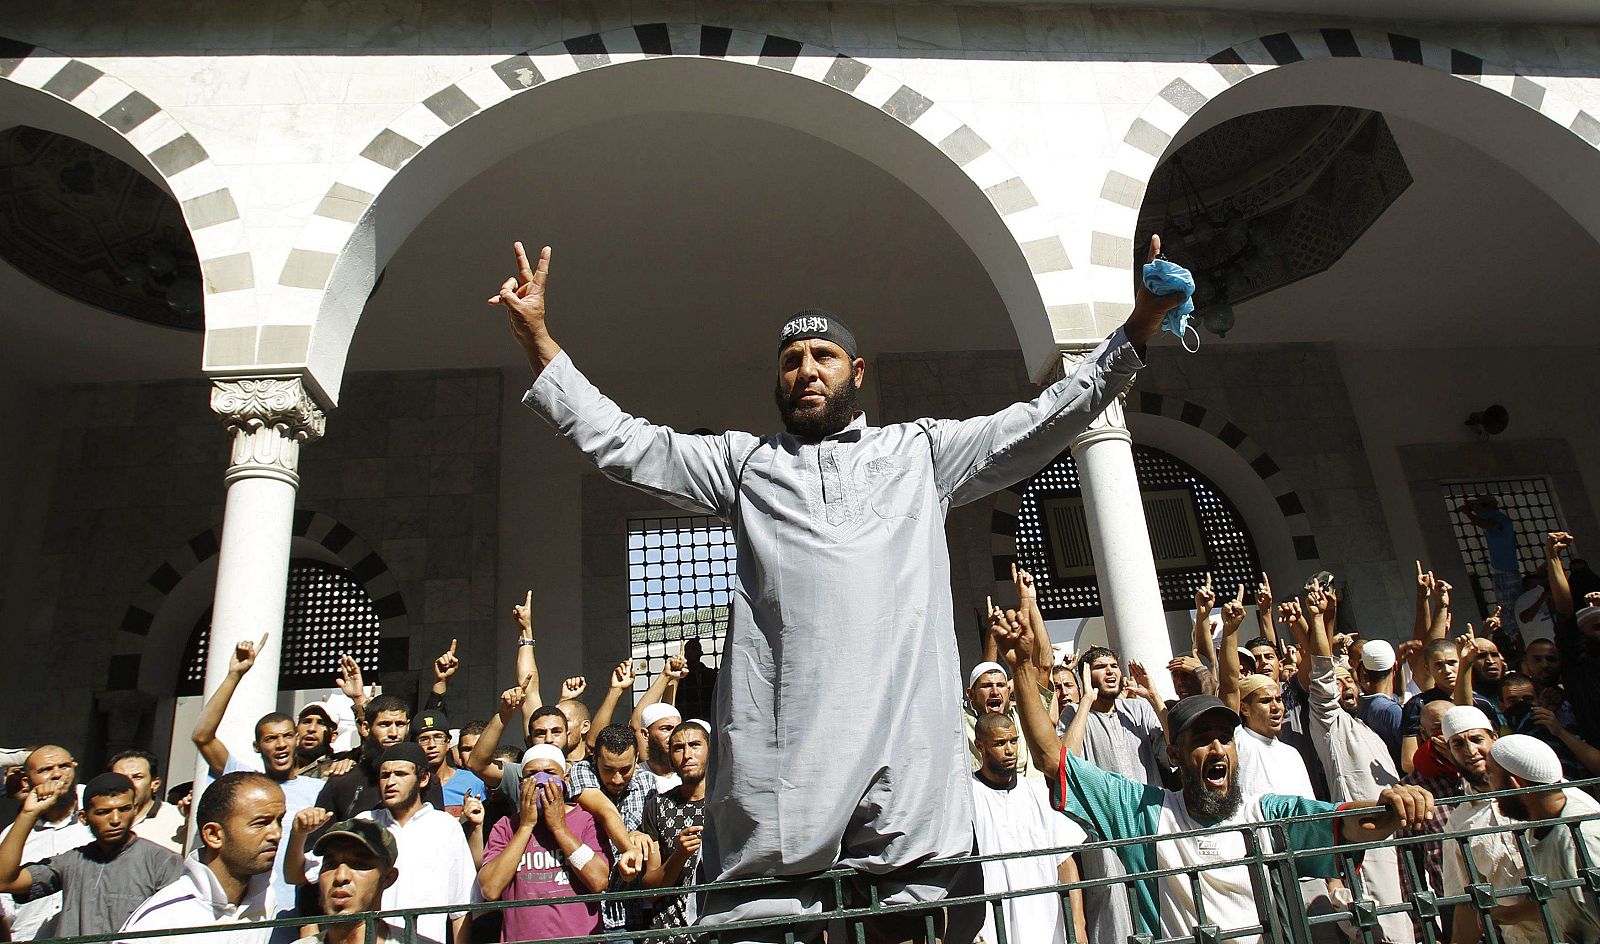 Protesters shout slogans during a demonstration at the al-Fatah mosque in Tunis